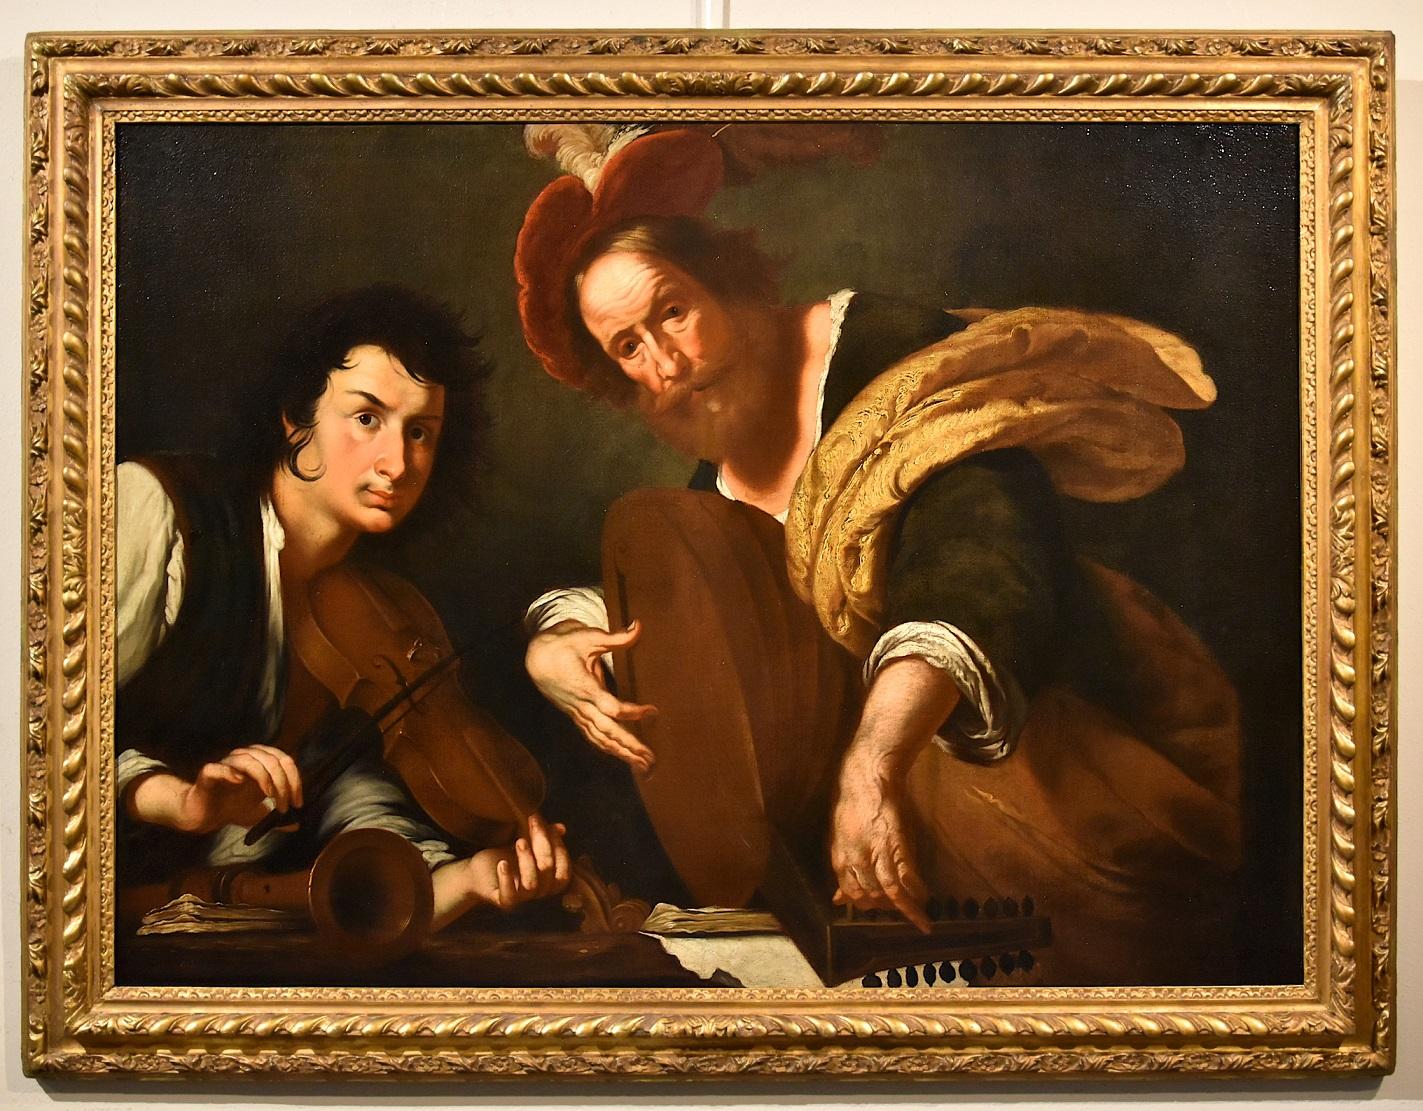 Concert Musicians Strozzi Paint Oil on canvas Old master 17th Century Italian - Painting by Bernardo Strozzi, known as the Genoese priest (Genoa 1581 - Venice 1644)